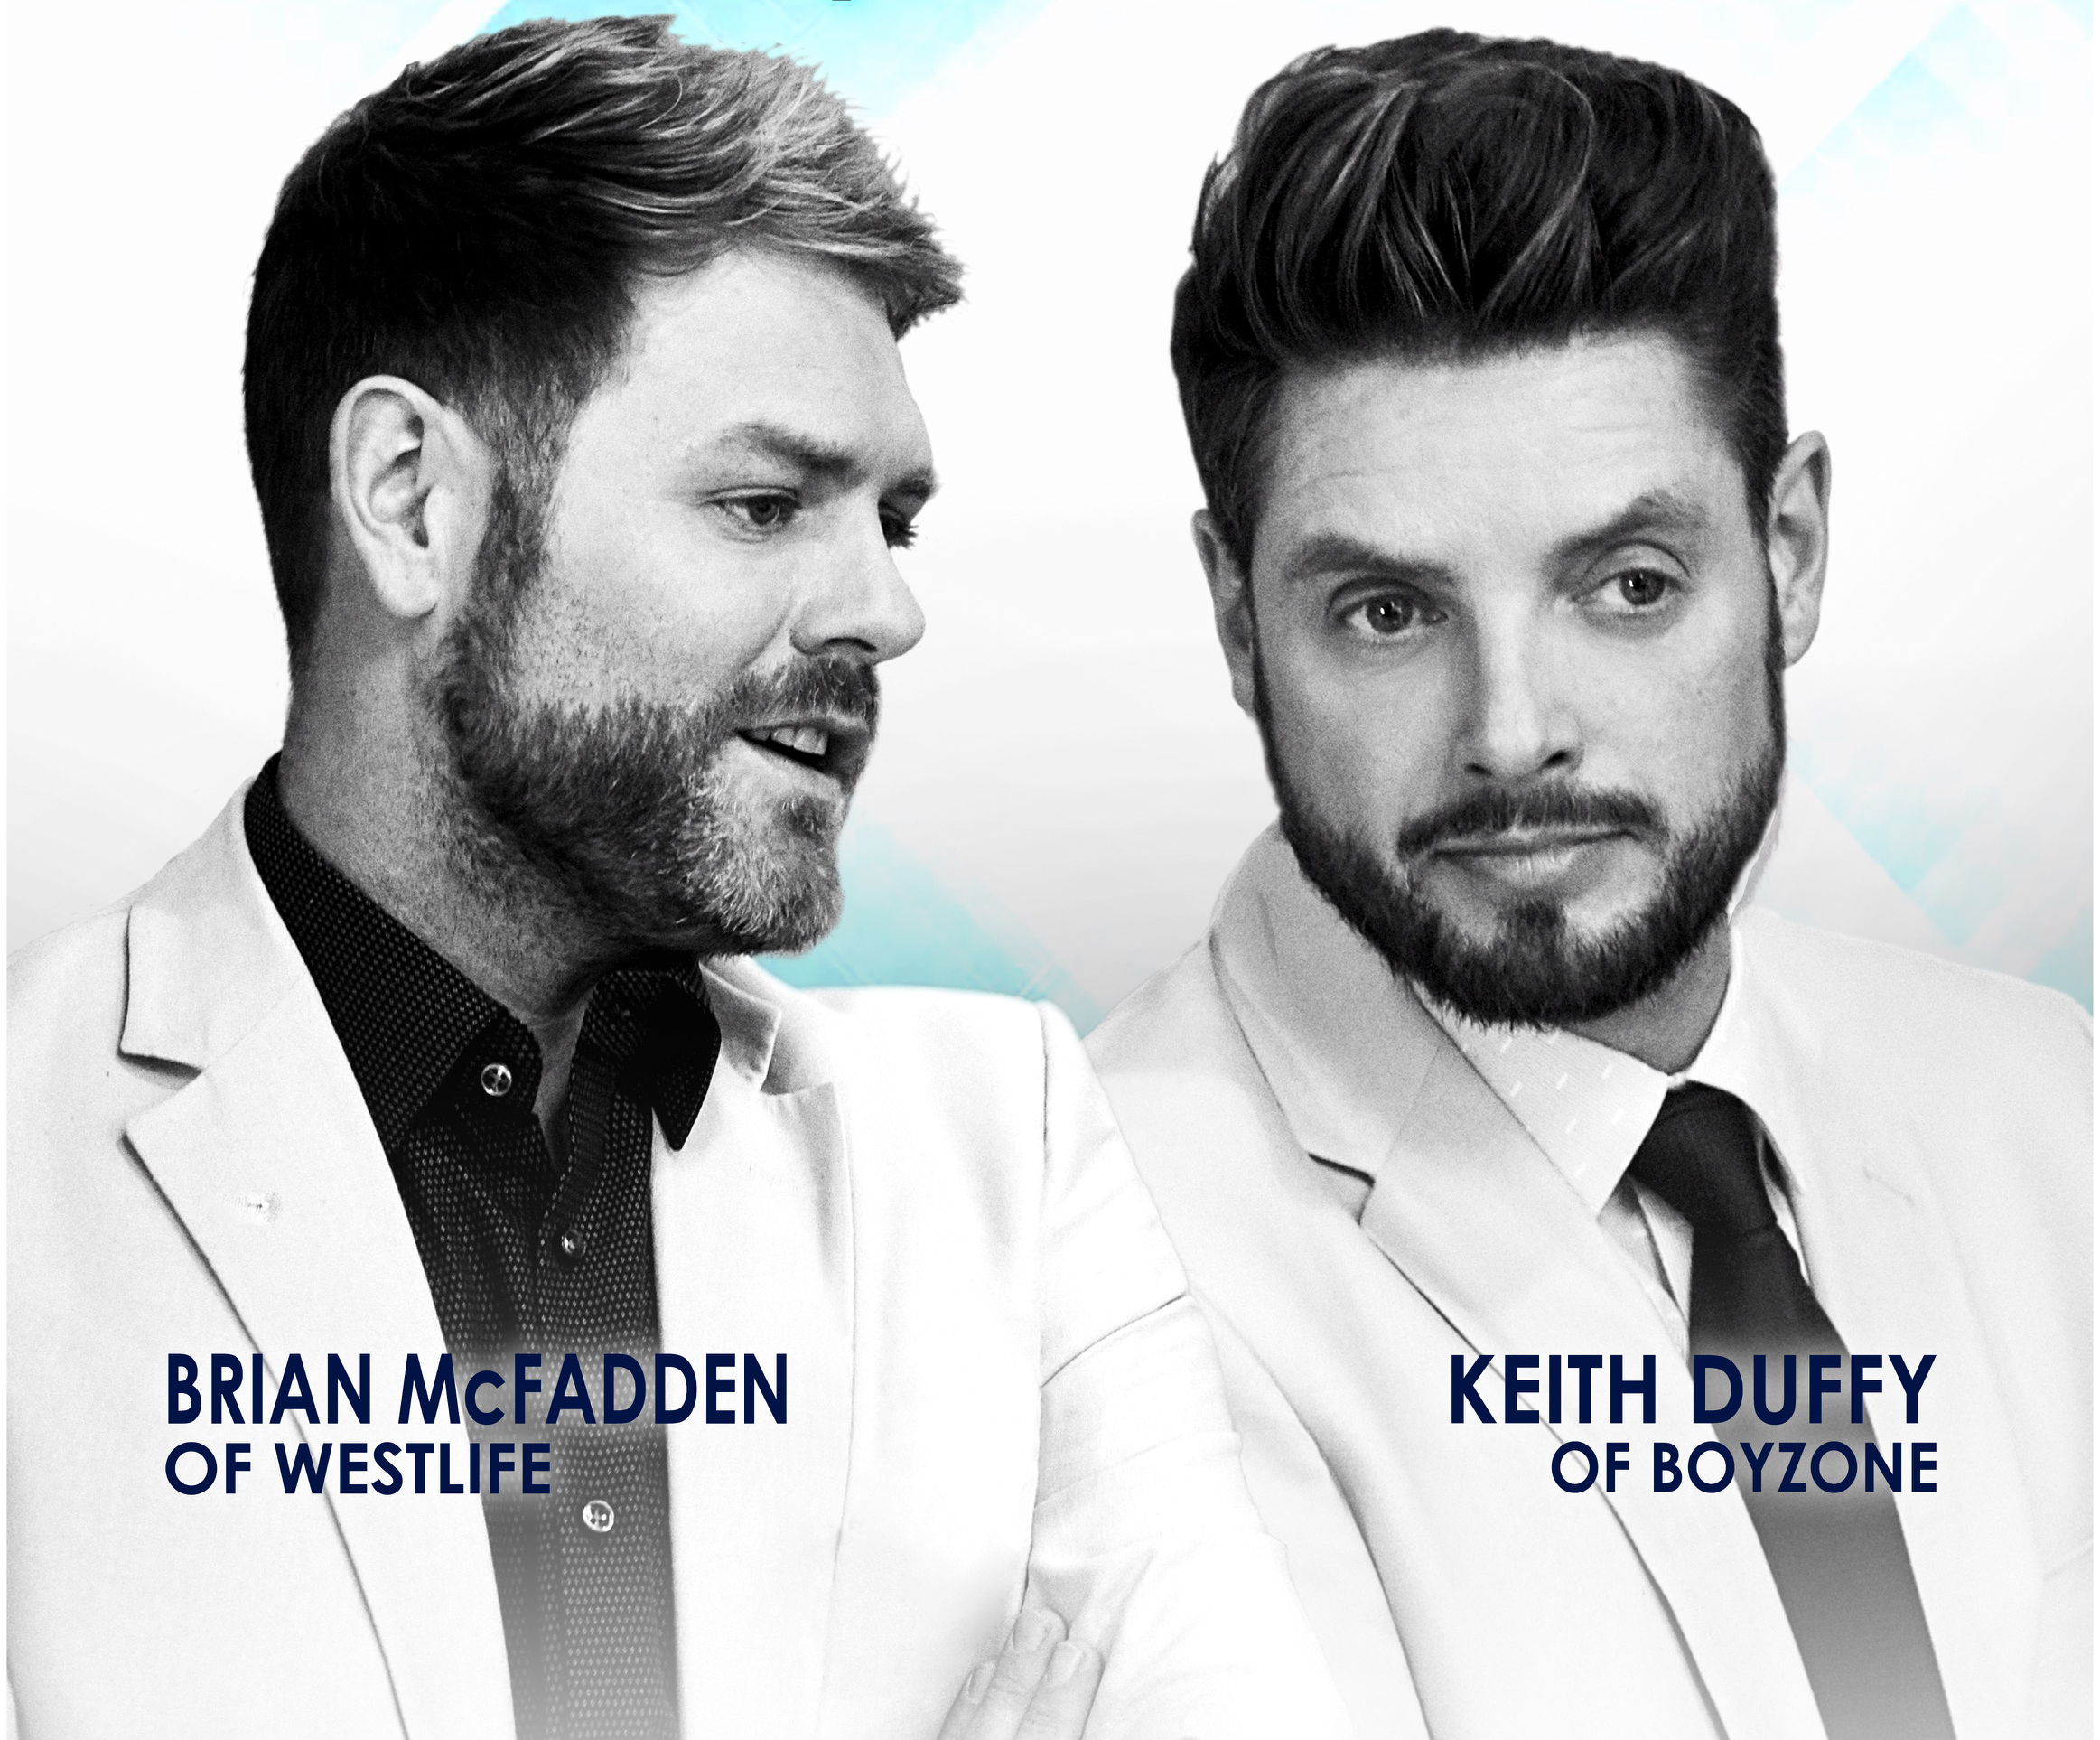 Boyzone’s Keith Duffy, Westlife’s Brian McFadden to Perform in Manila in December